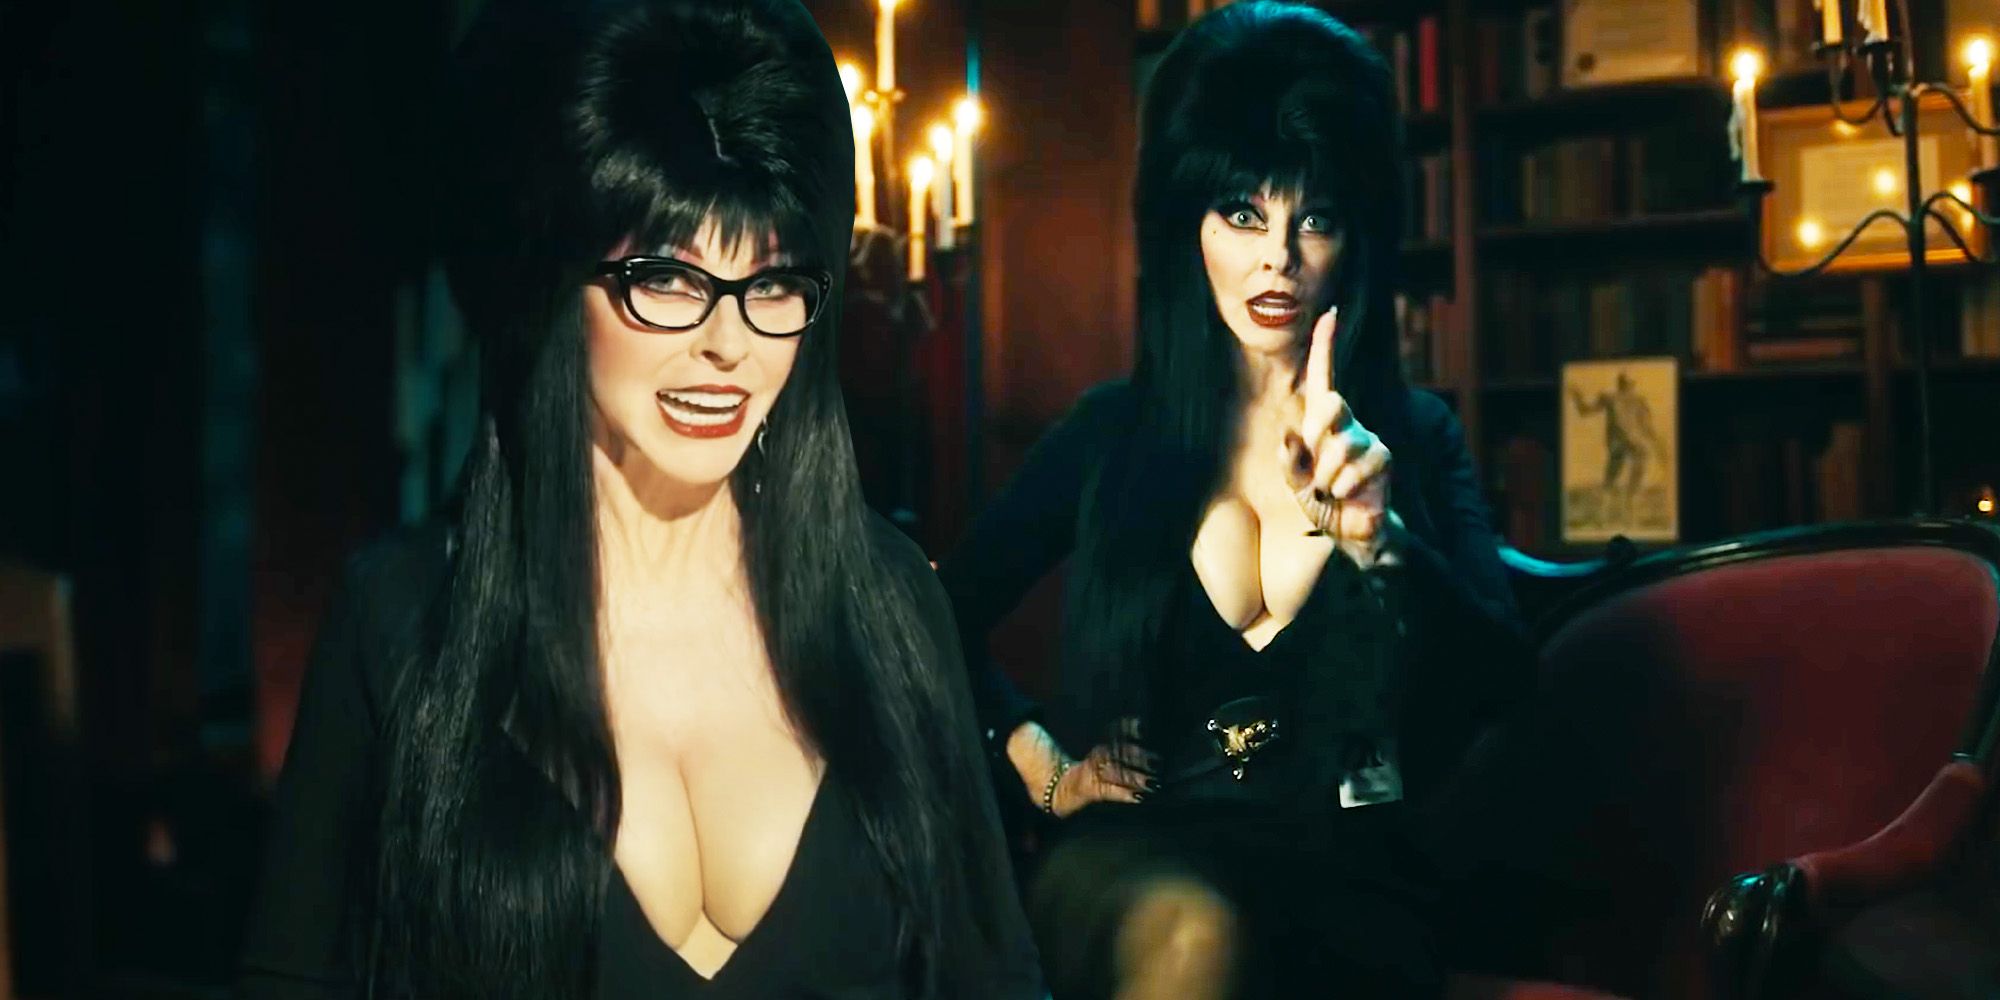 Elvira Explains How Horror Movies Are Good For You In New Netflix Video